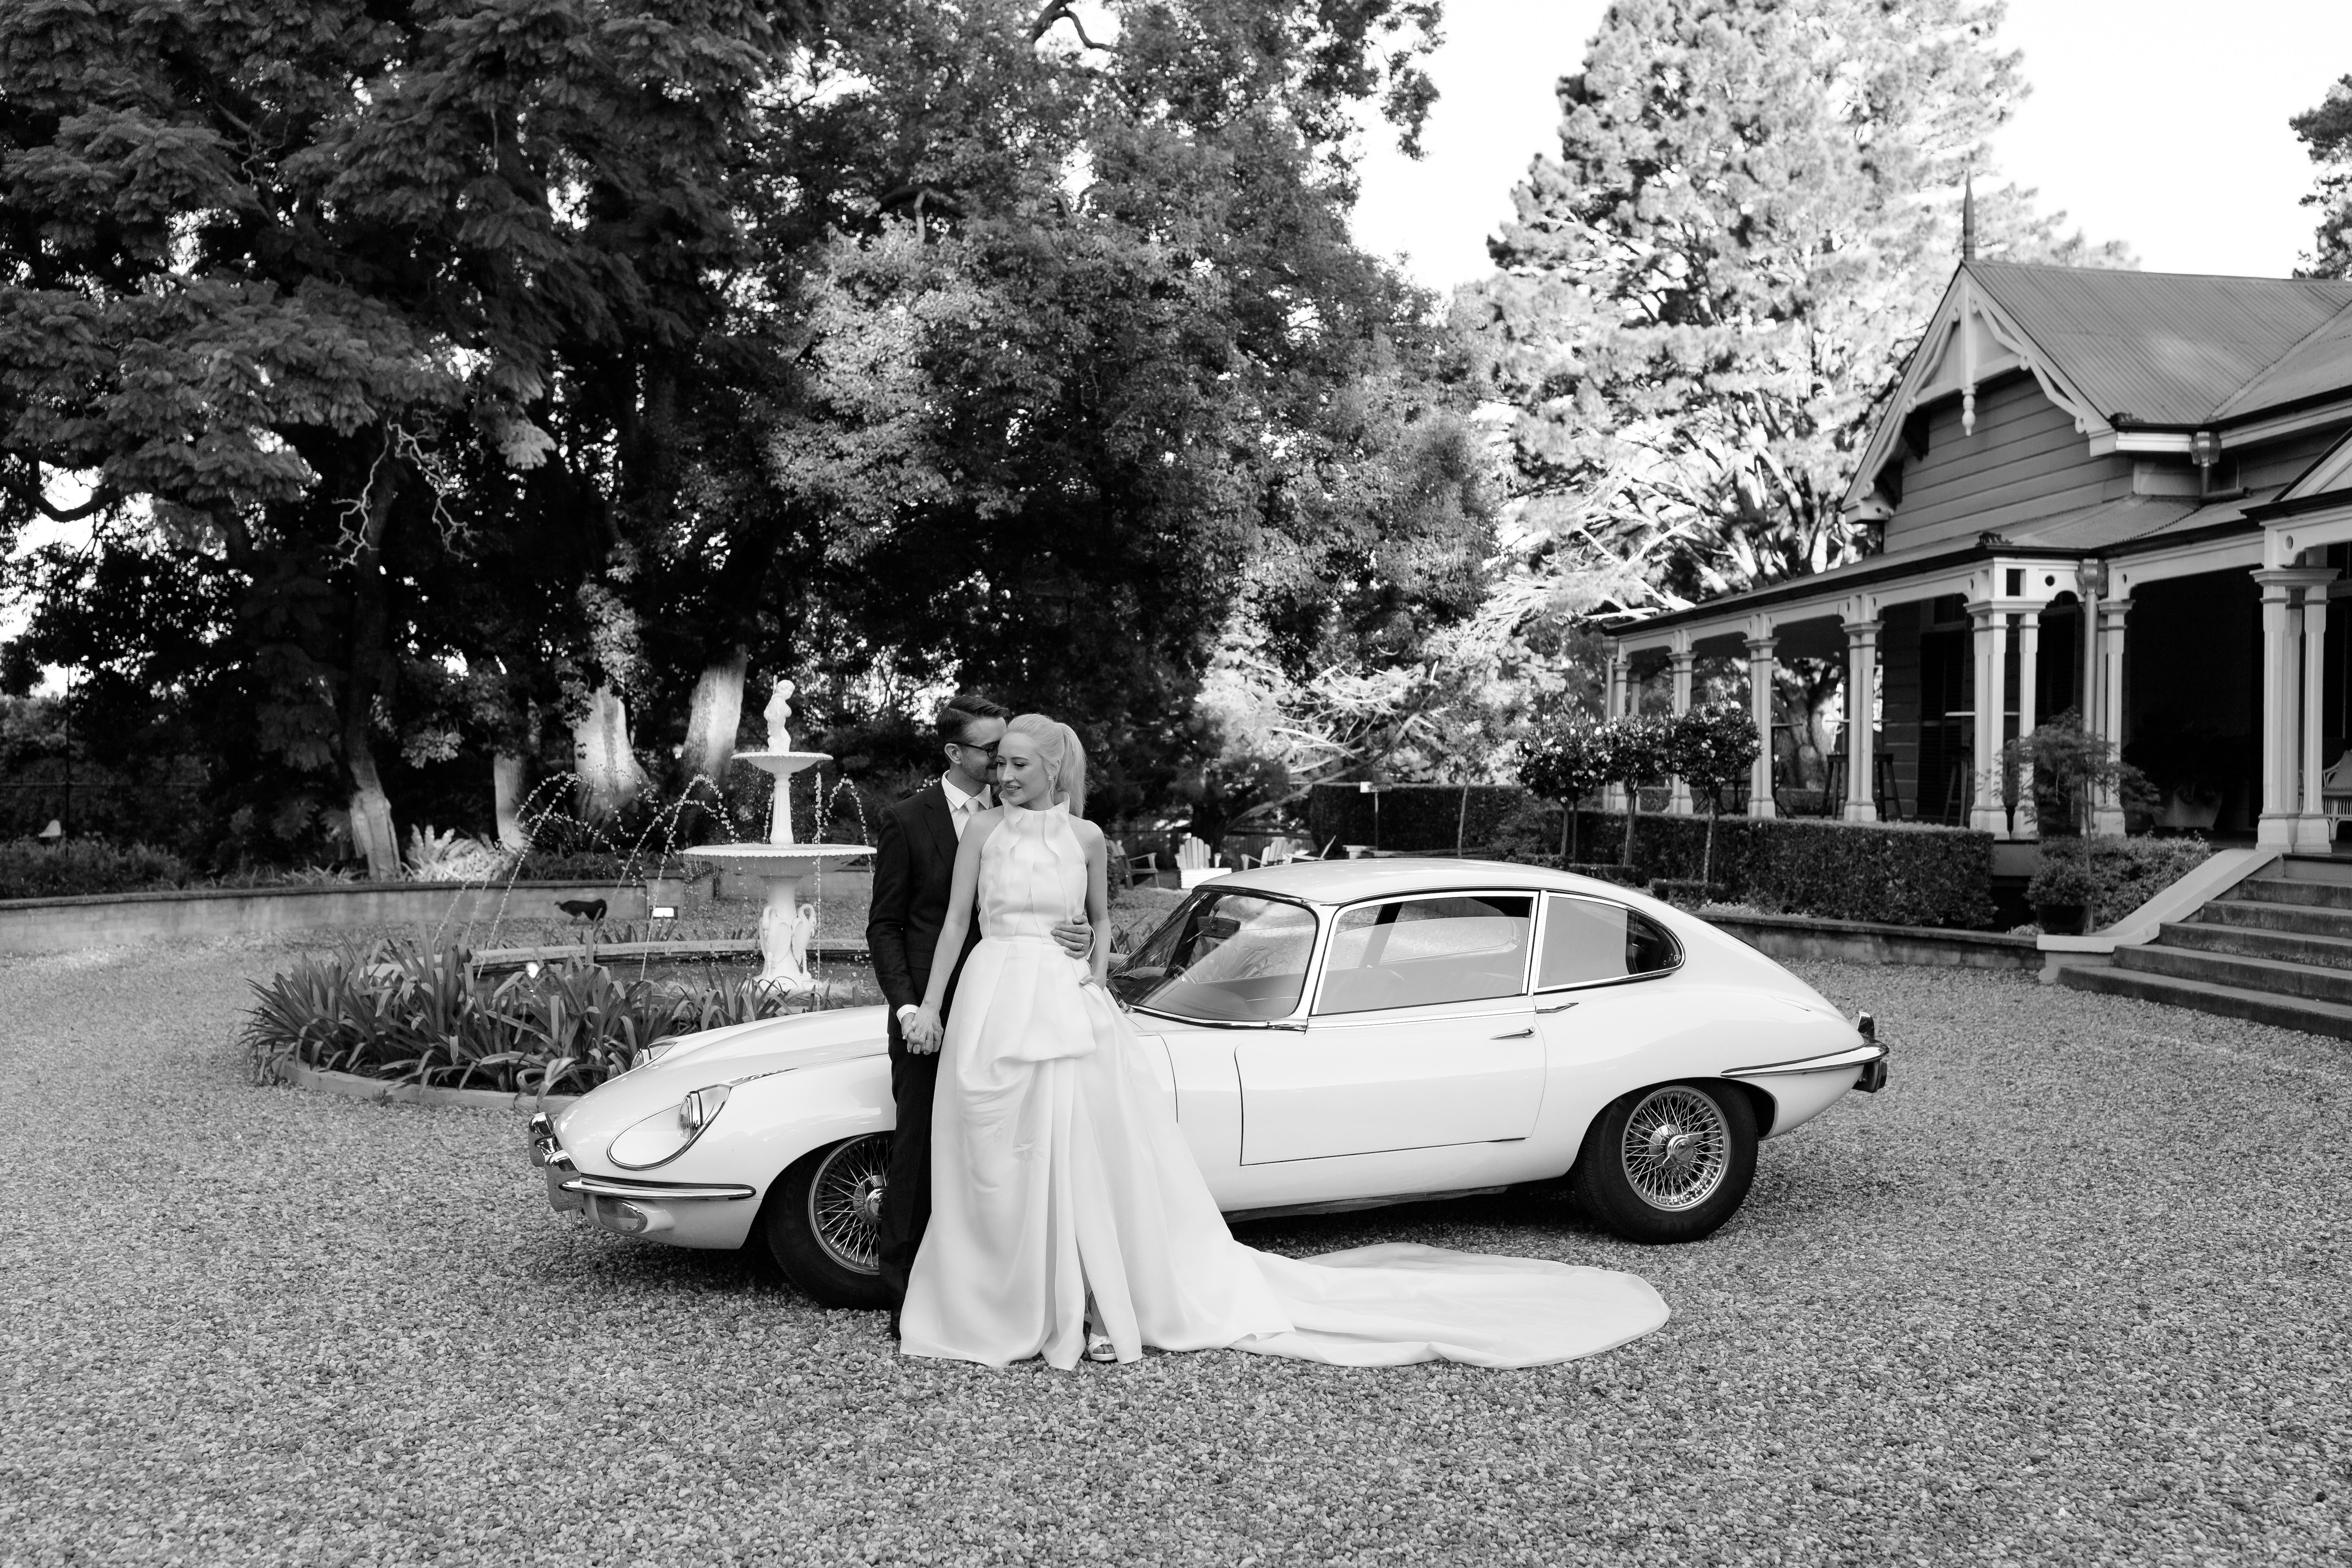 Couple pose in front of car